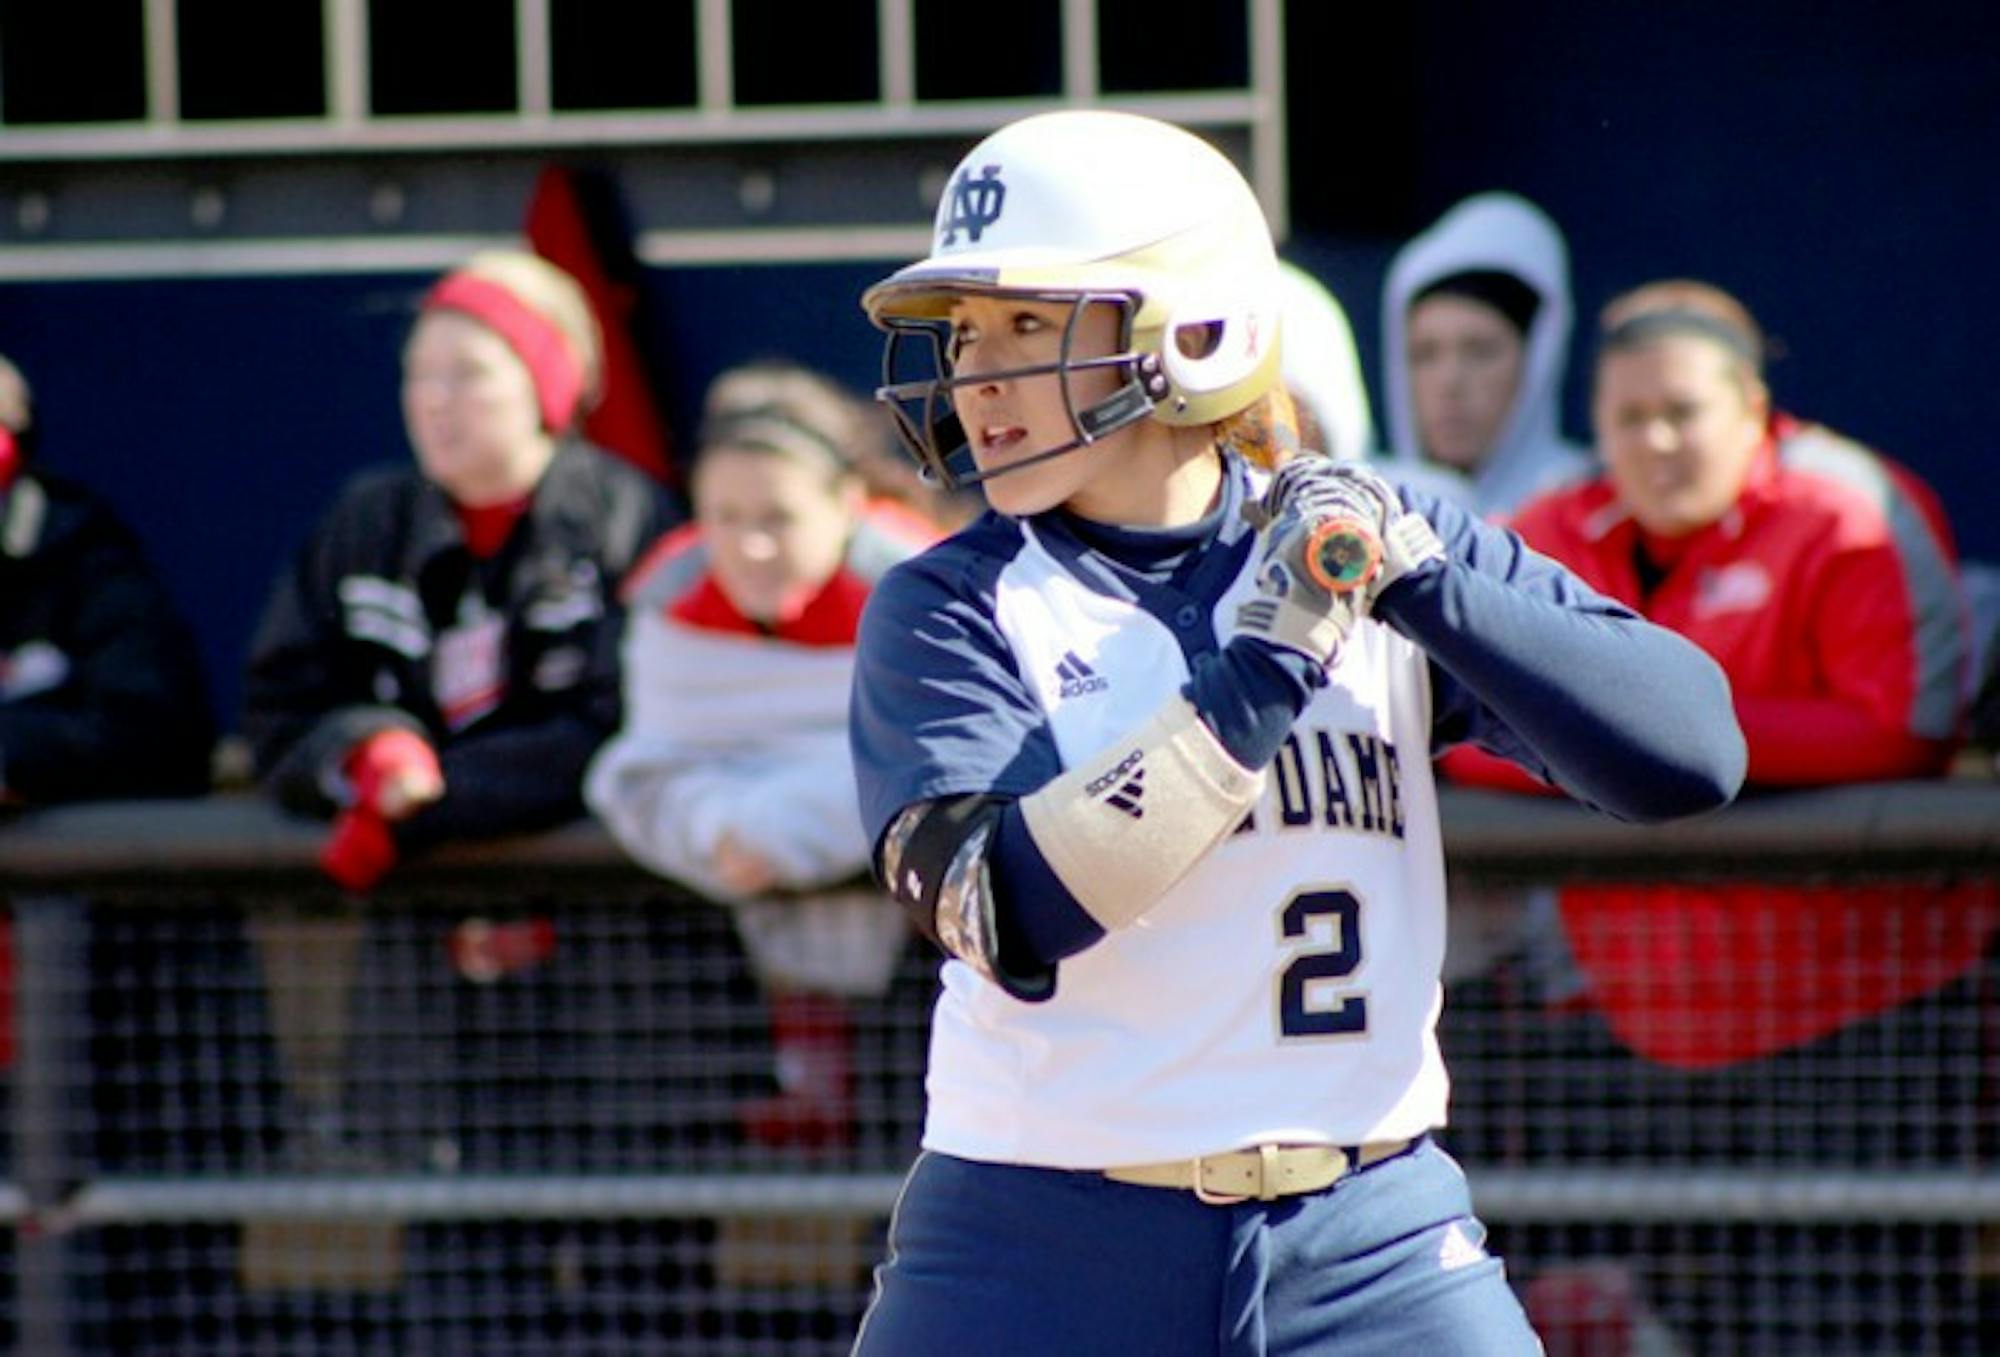 Irish junior catcher Cassidy Whidden prepares for the incoming pitch against Ball State during Notre Dame's 11-4 win on April 1. On Monday, the junior finished with two hits in three at bats.